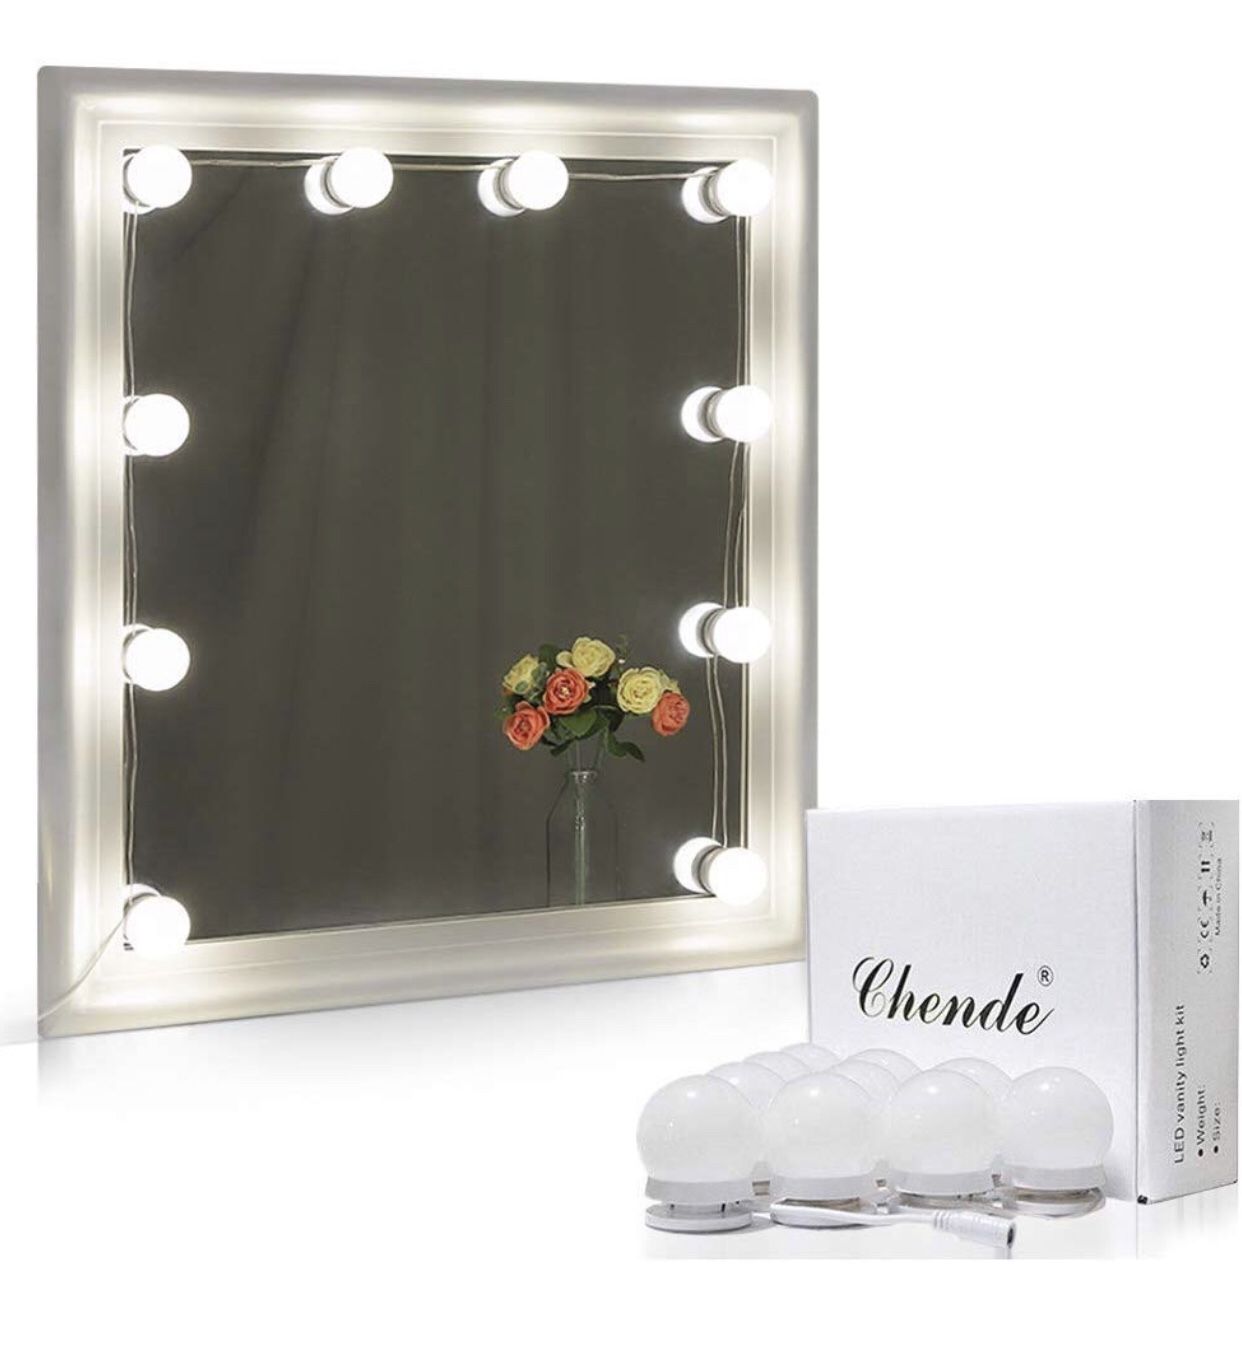 Chende Hollywood Style LED Vanity Mirror Lights Kit with Dimmable Light Bulbs